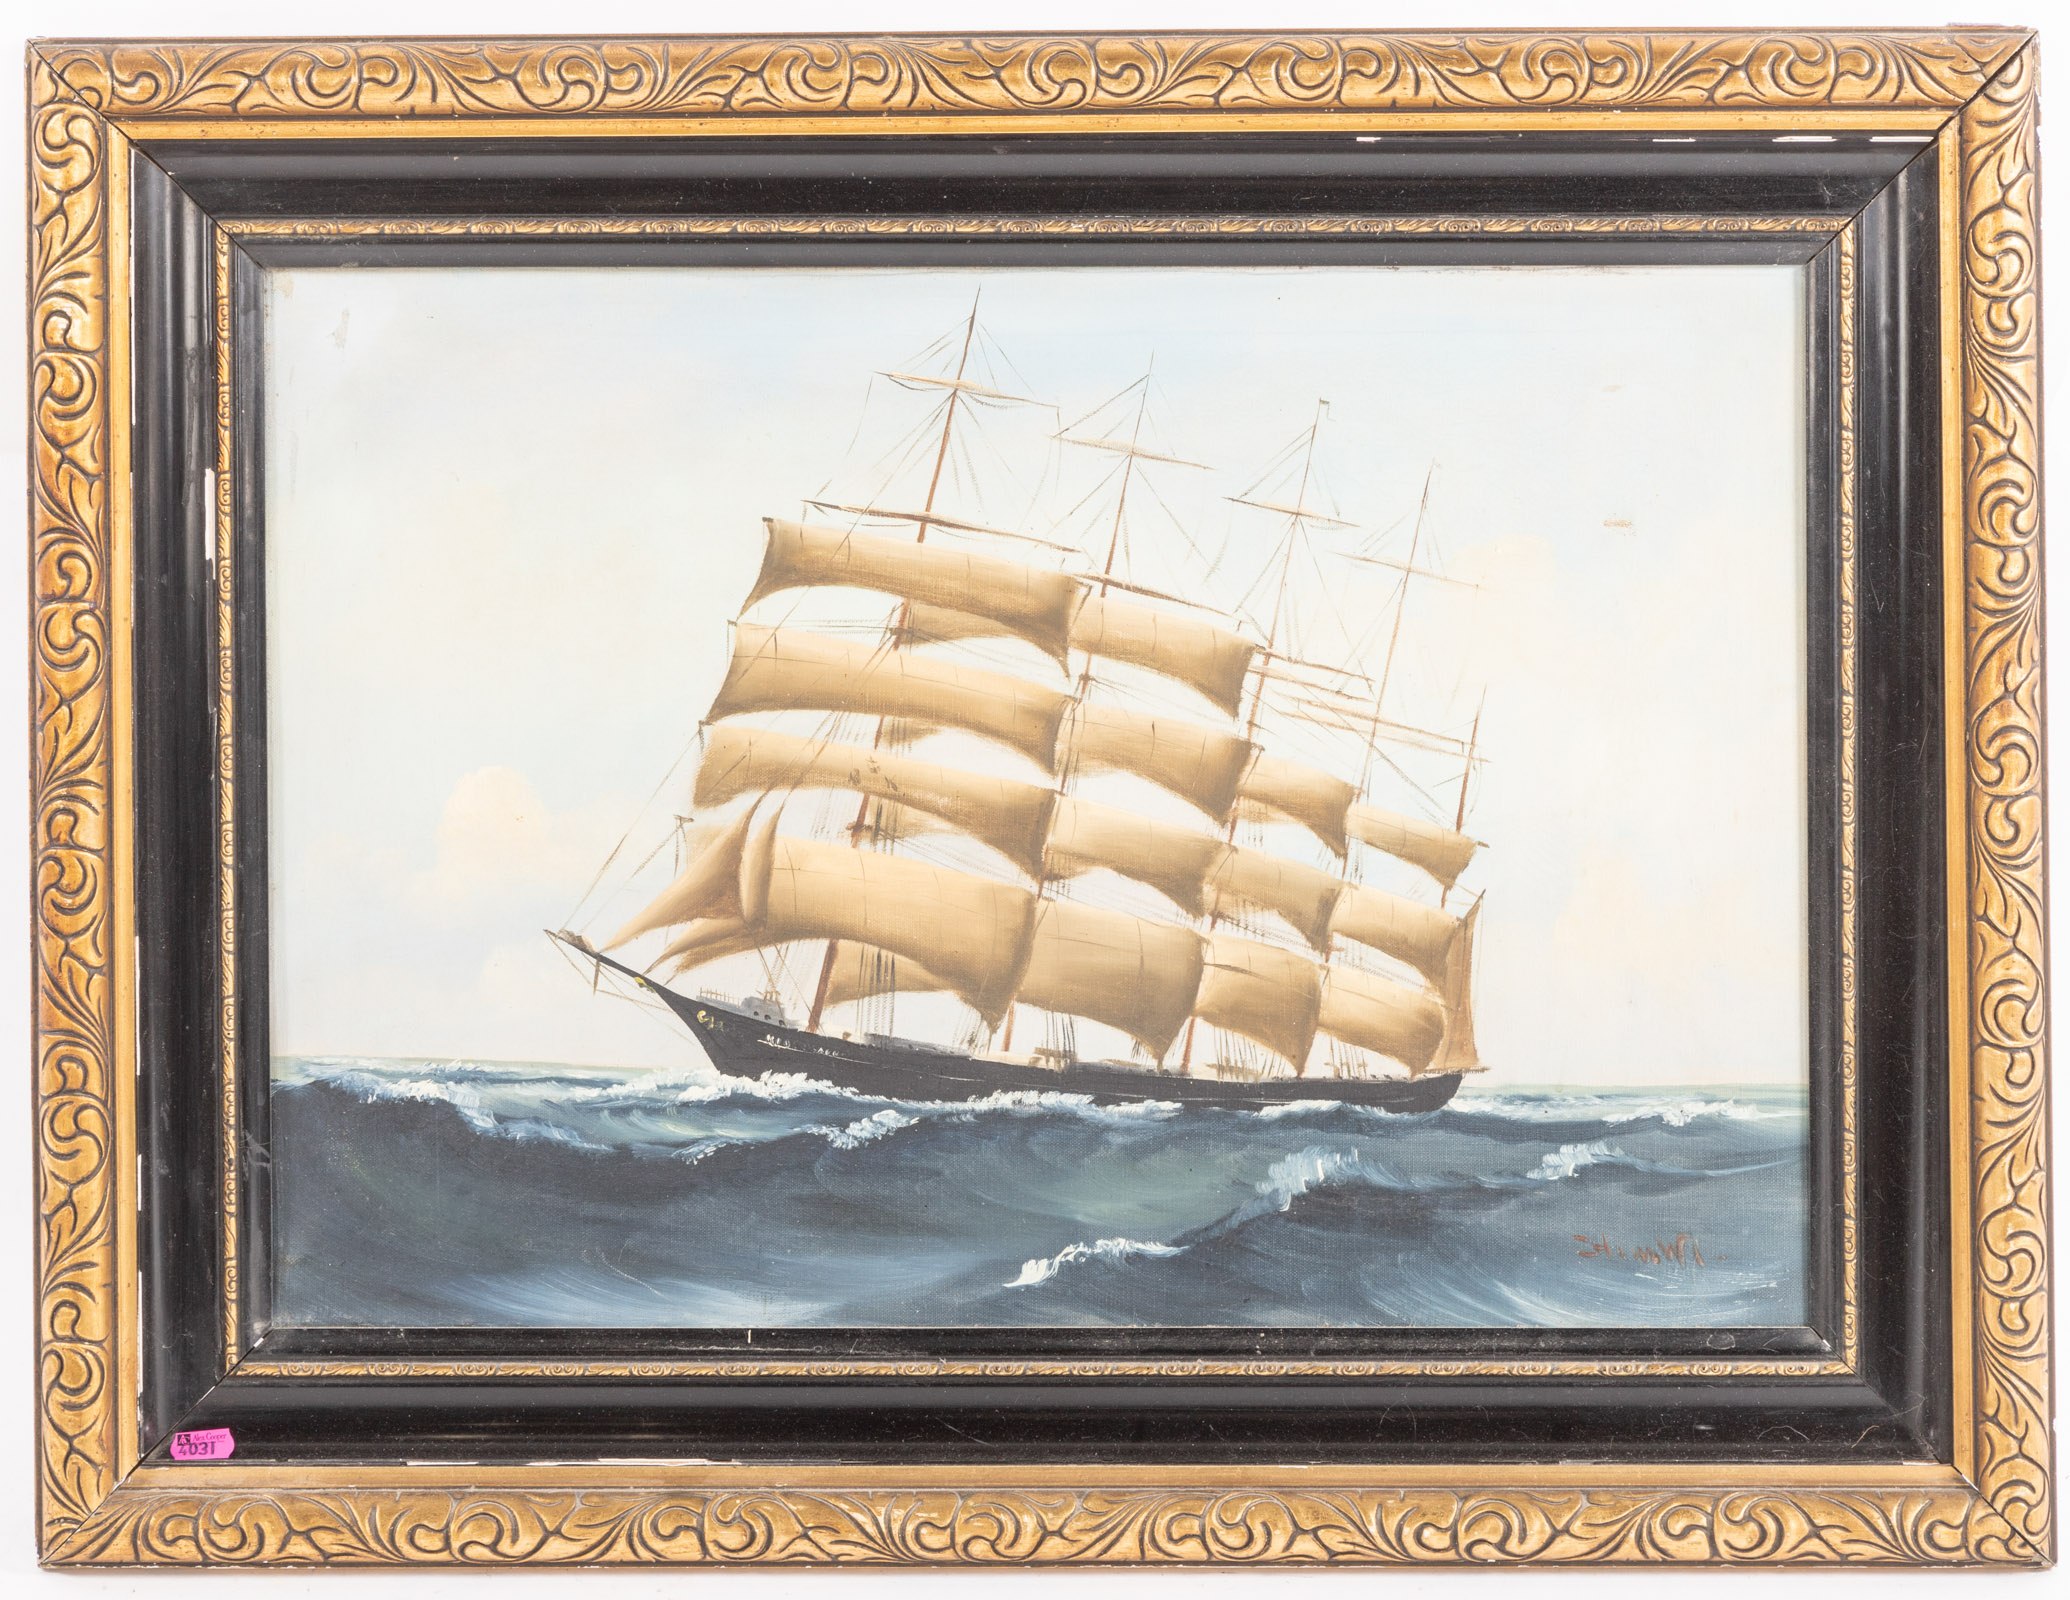 ARTIST UNKNOWN, 20TH C. FULL MASTED